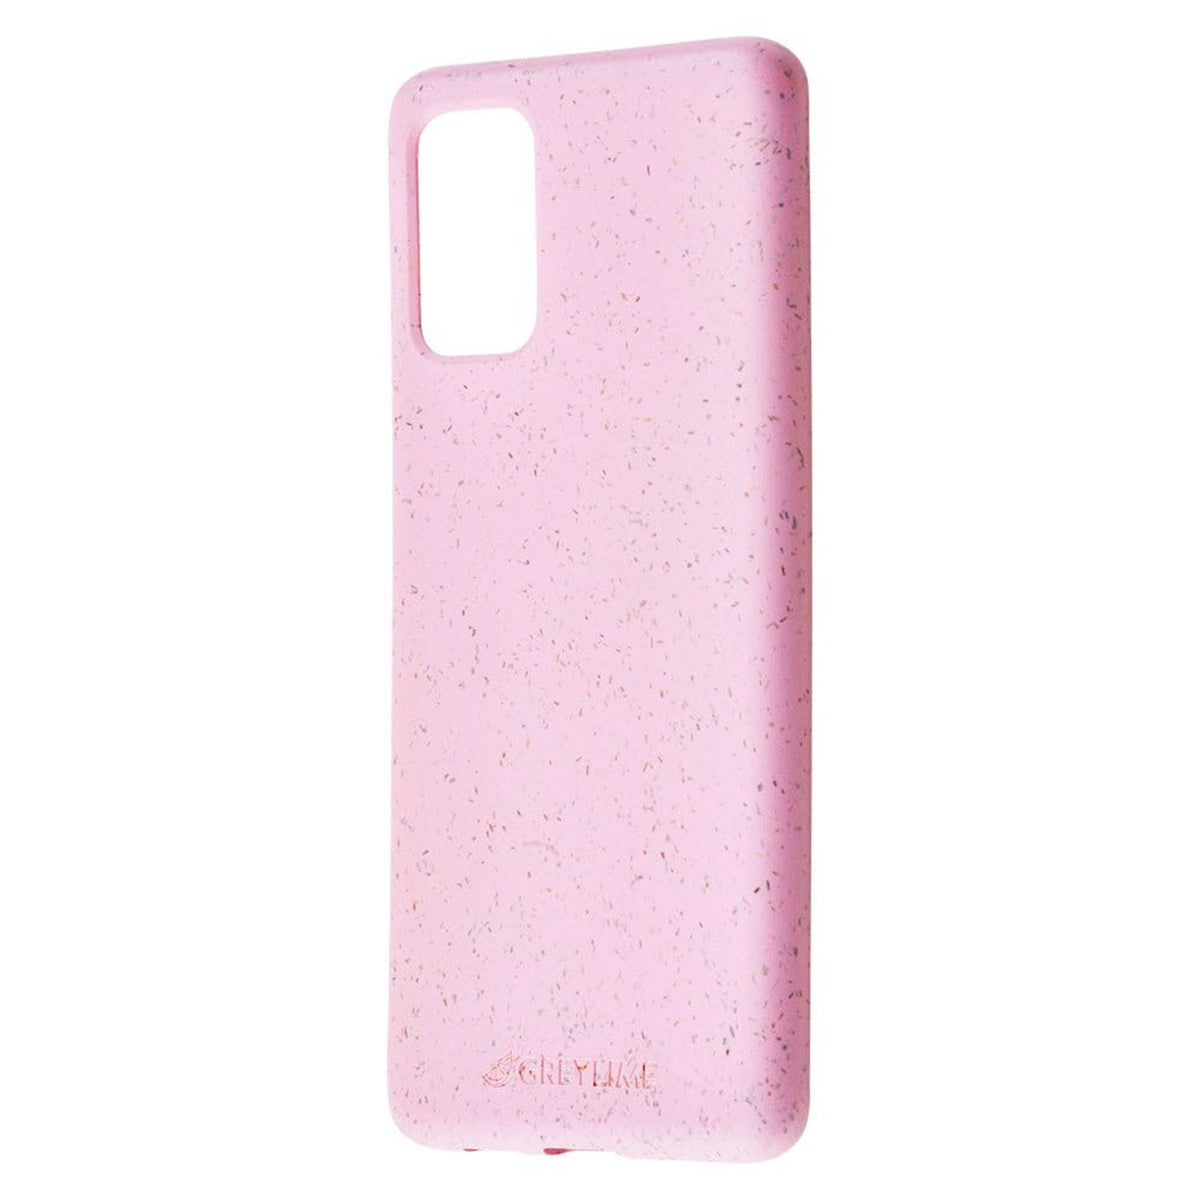 GreyLime-Samsung-Galaxy-S20-Biodegradable-Cover-Pink-COSAM20P05-V2.jpg